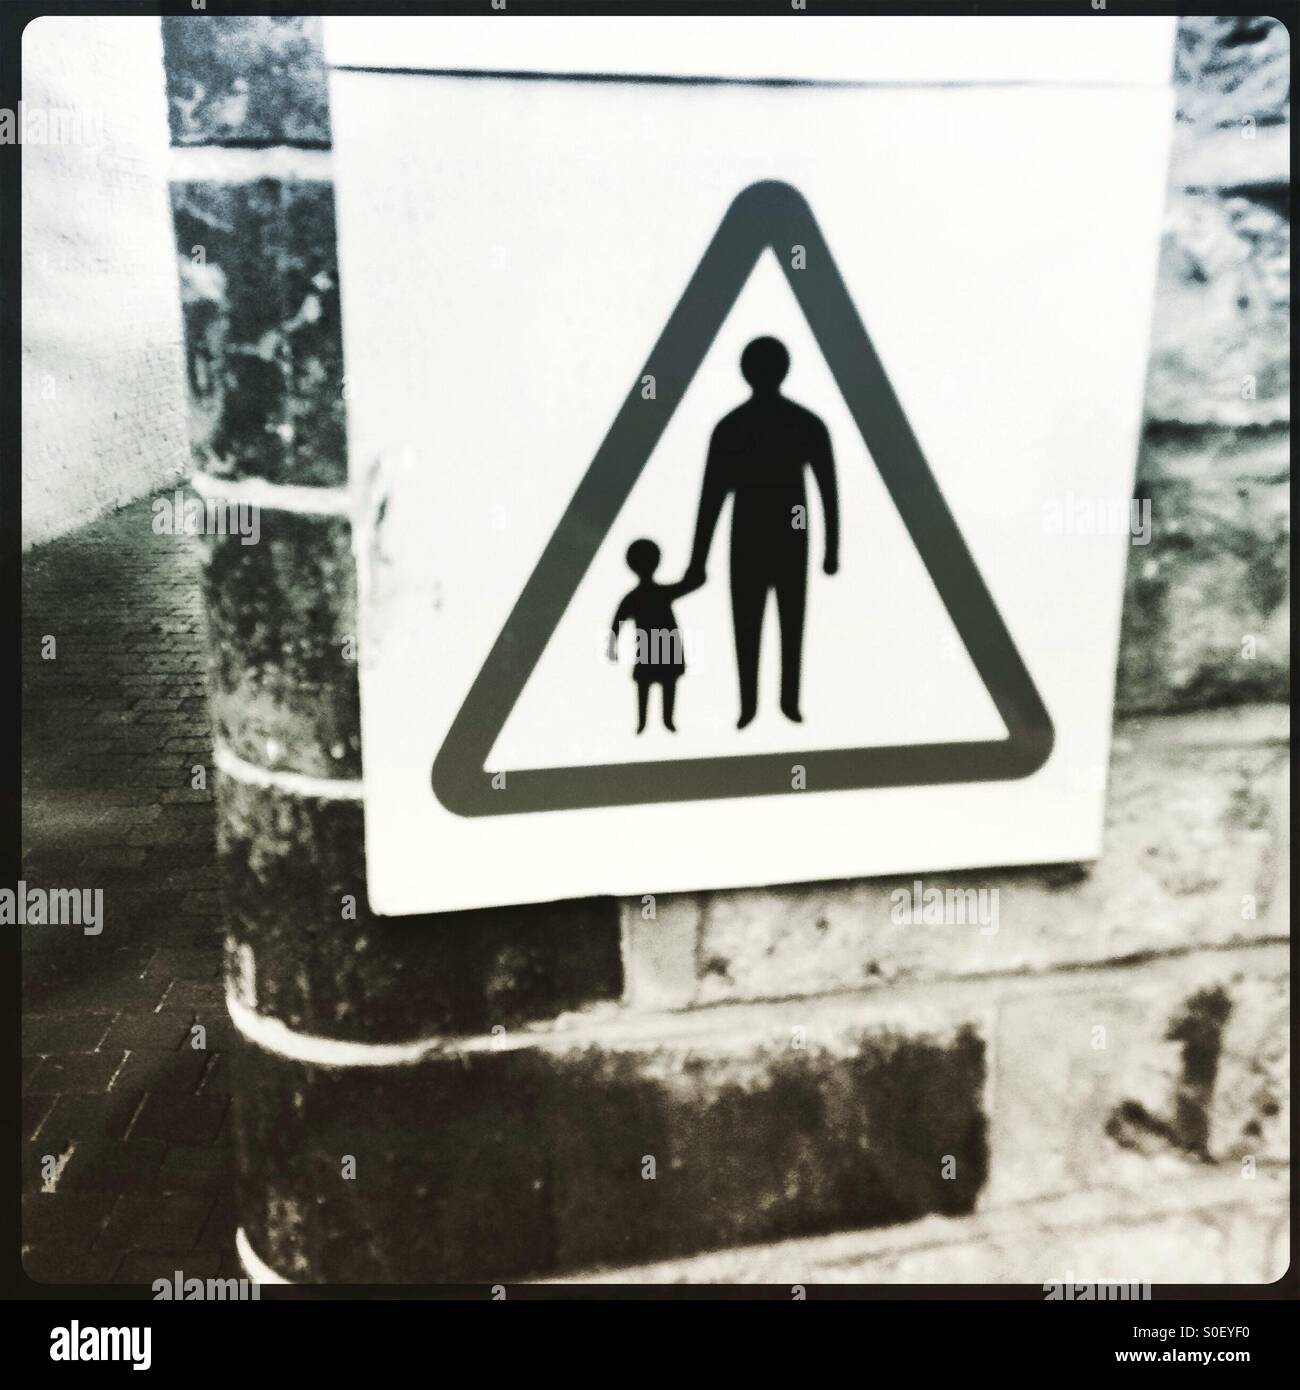 Parent and child warning sign Stock Photo